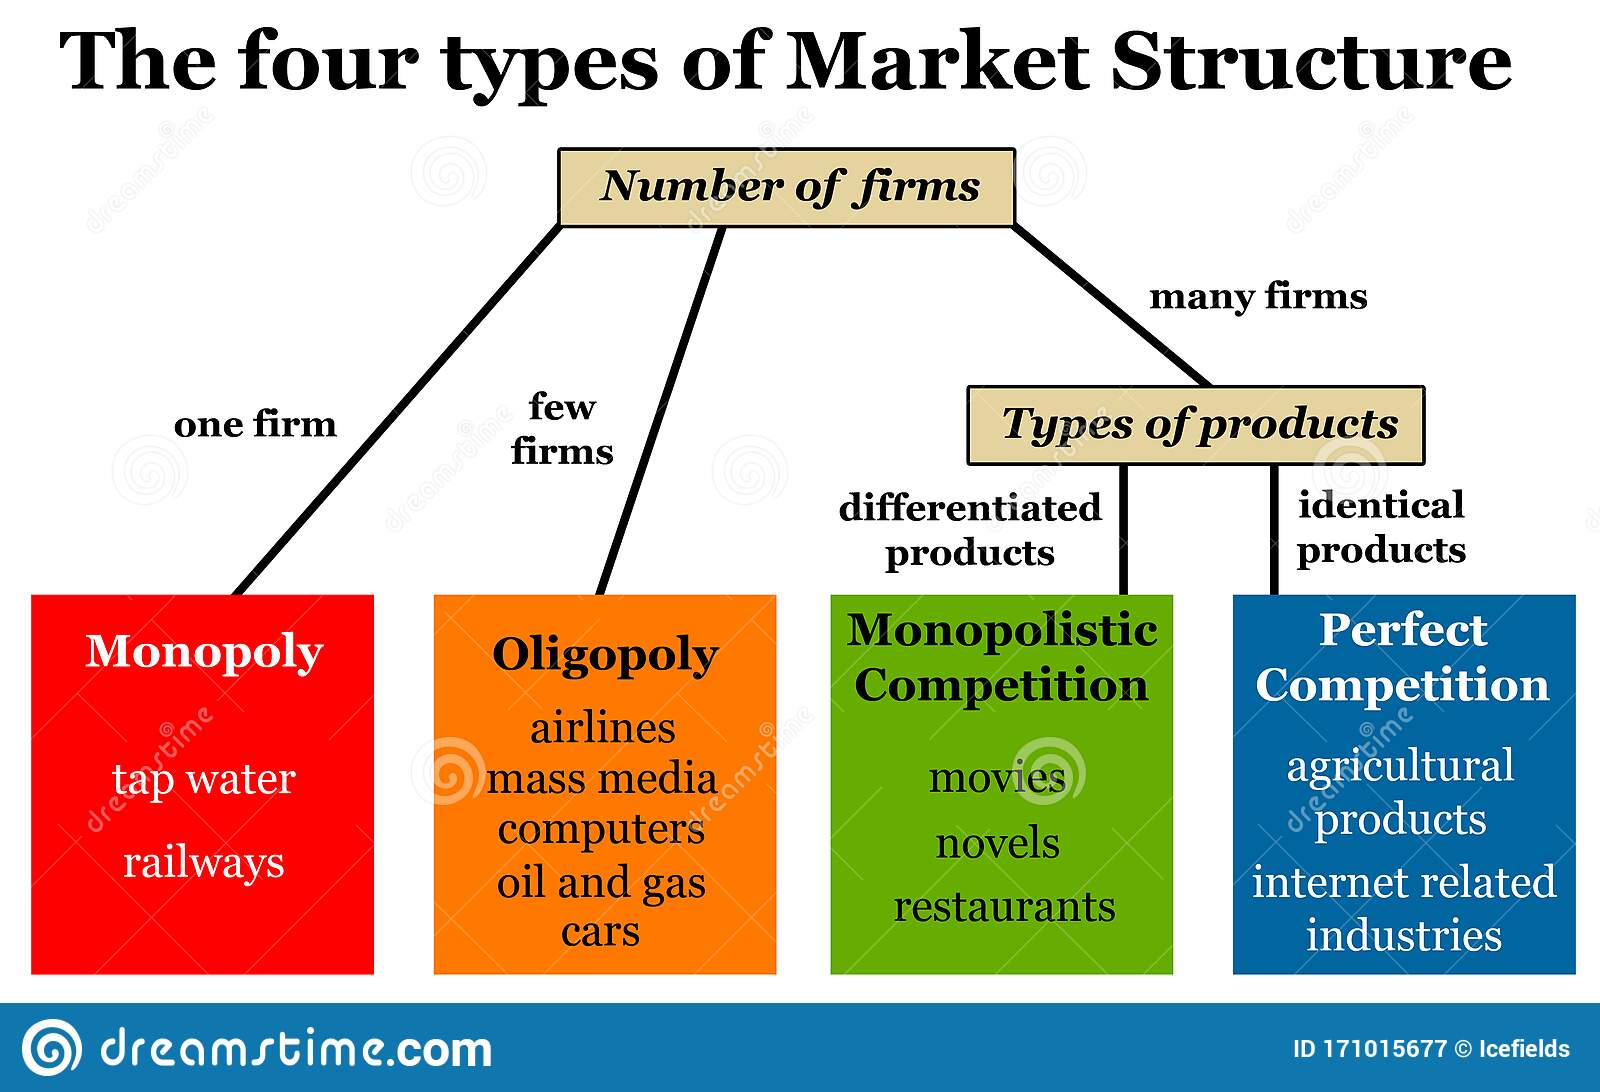 what are the different types of market structure